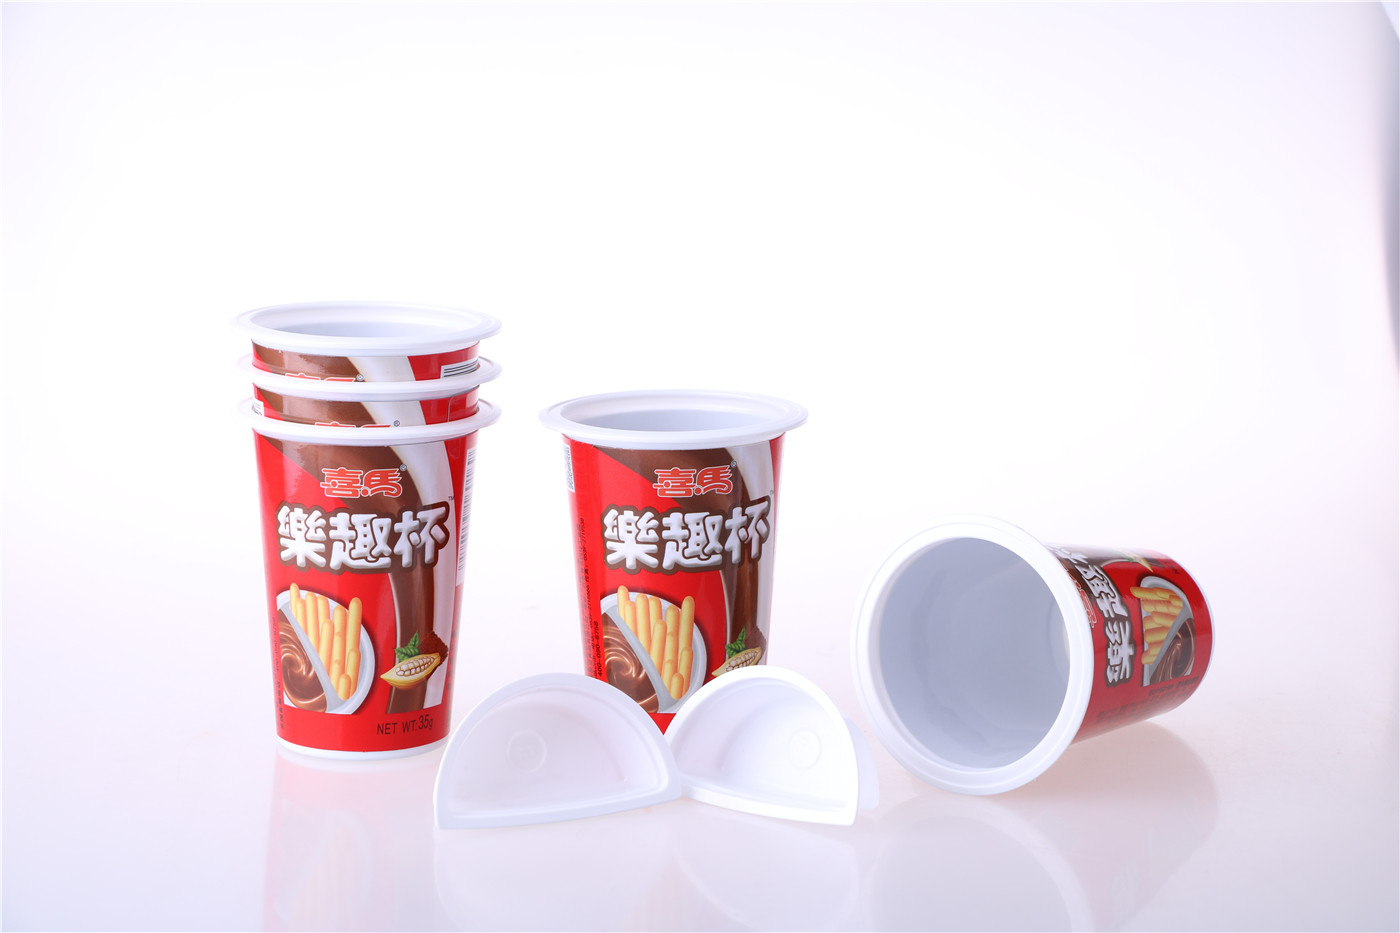 Sauce Plastic Tray For Biscuit-Real Shot4